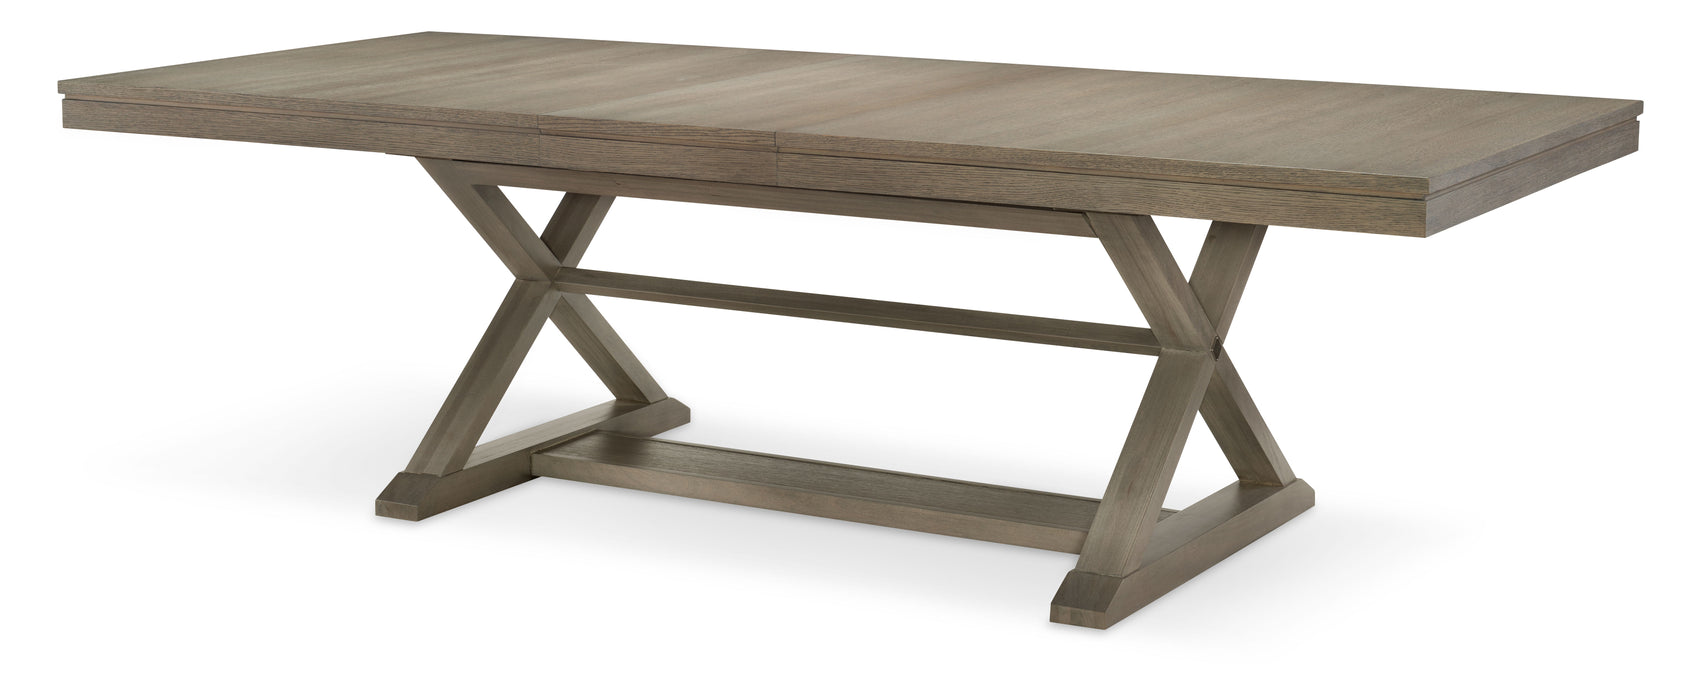 Highline by Rachael Ray - Complete Trestle Table - Light Brown